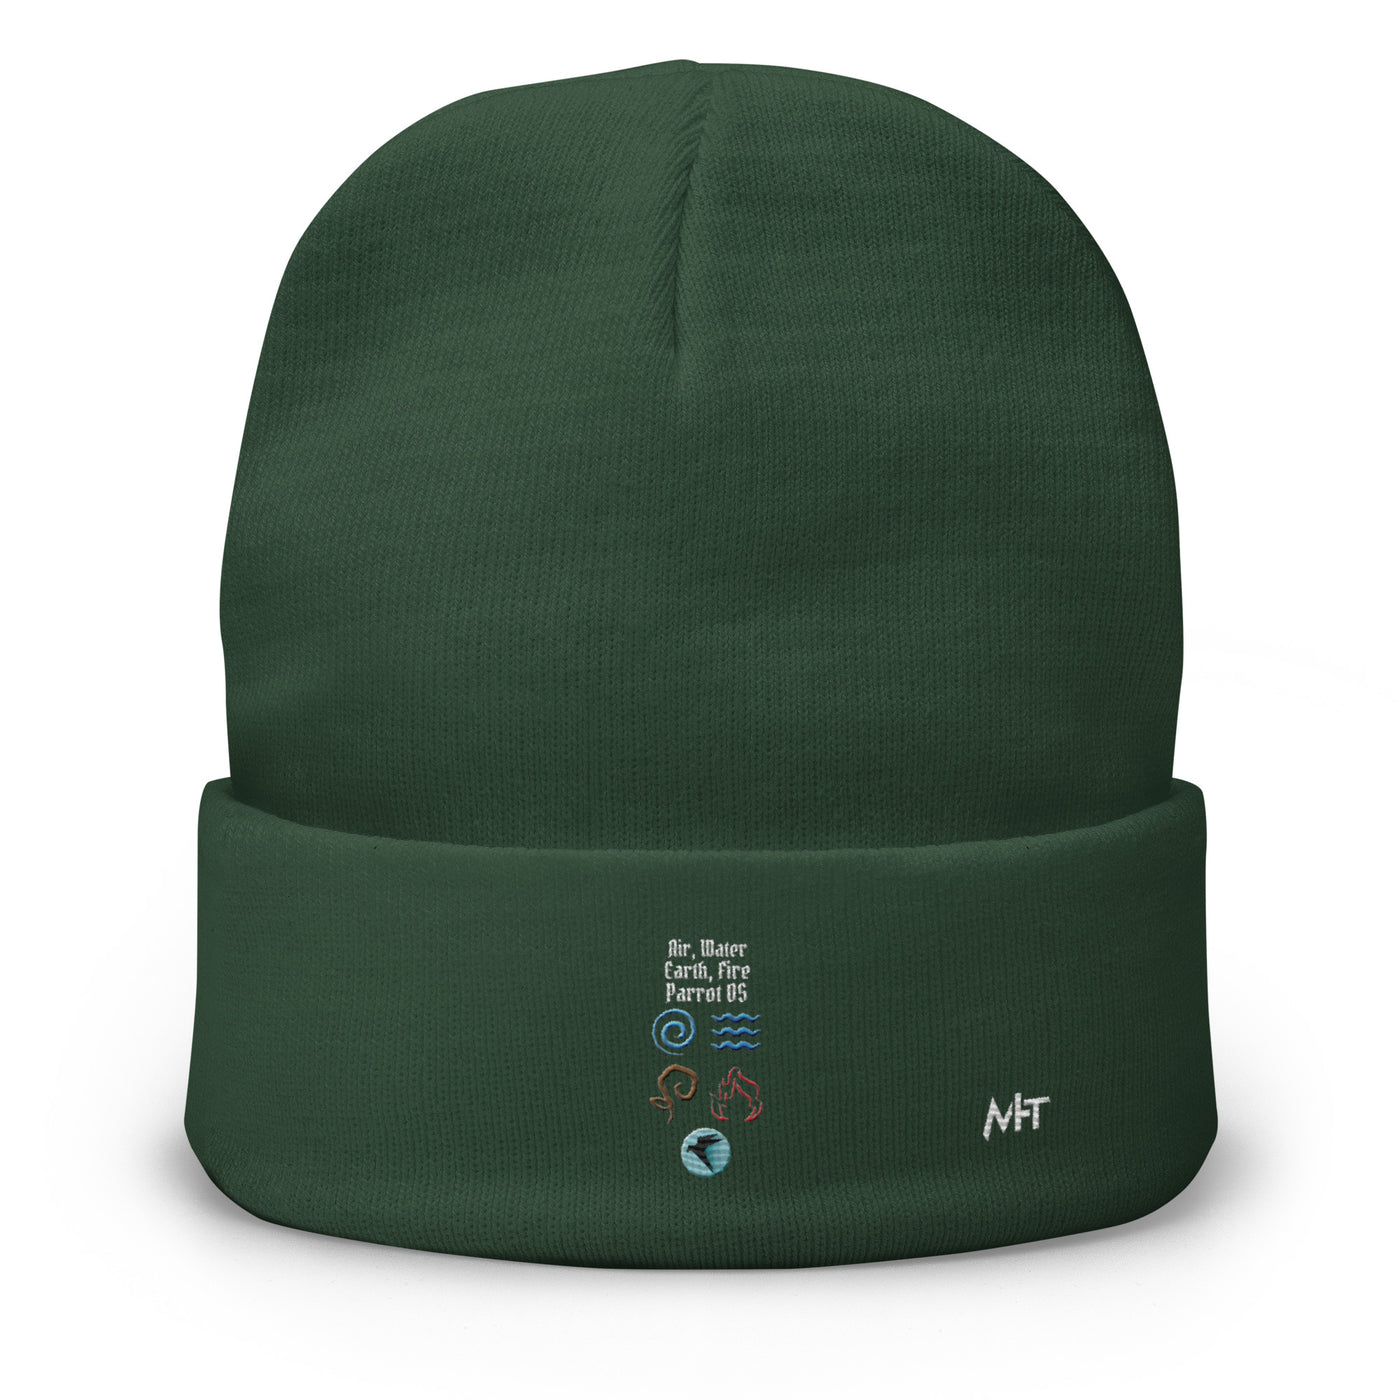 Air, Water, Earth, Fire, Parrot OS - Embroidered Beanie